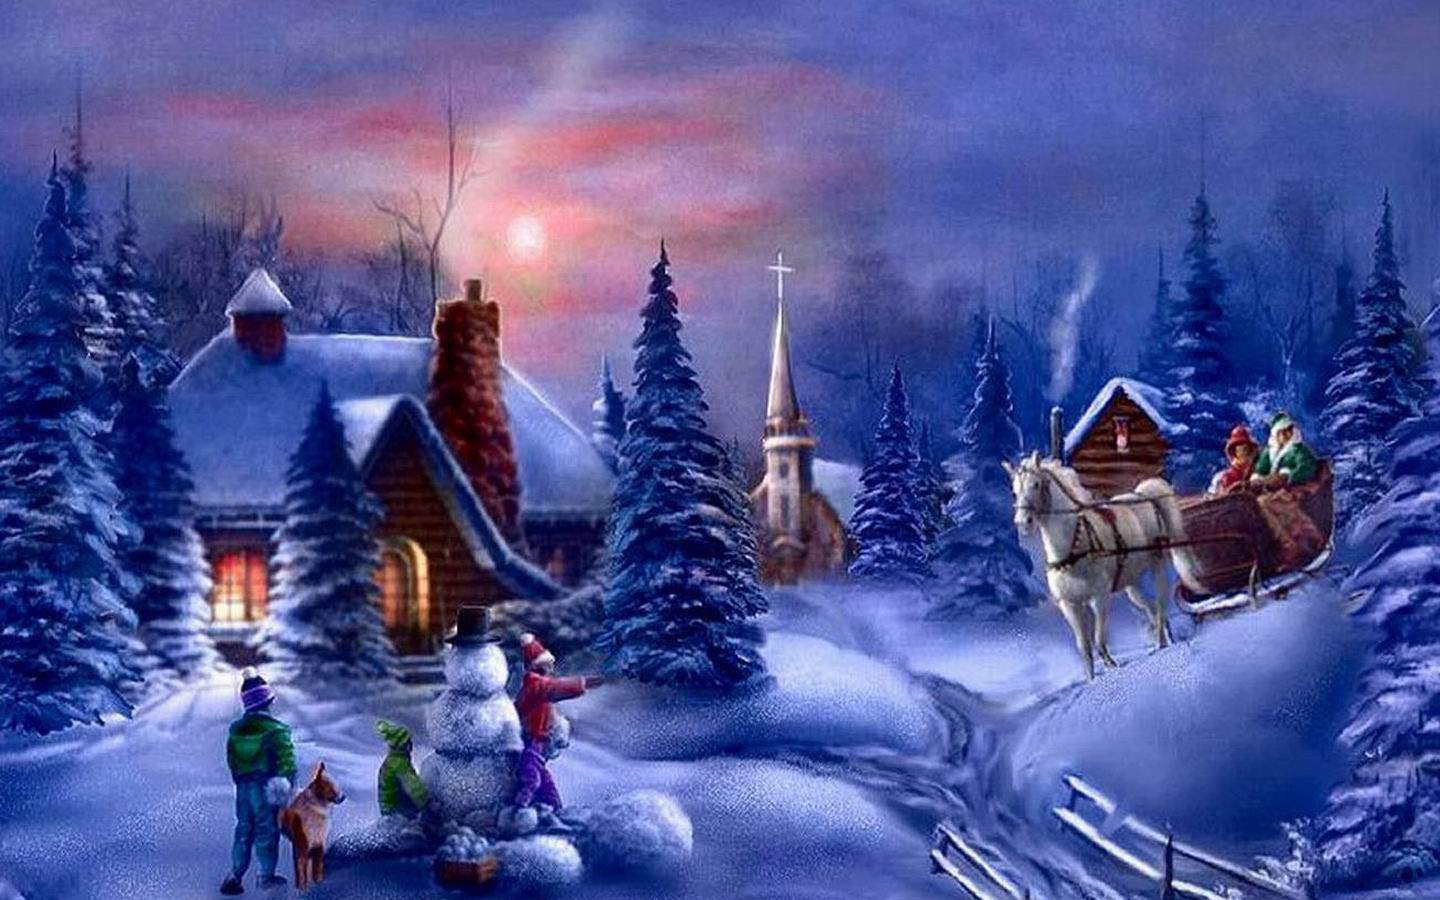 2015 Christmas desktop backgrounds free - wallpapers, images ...